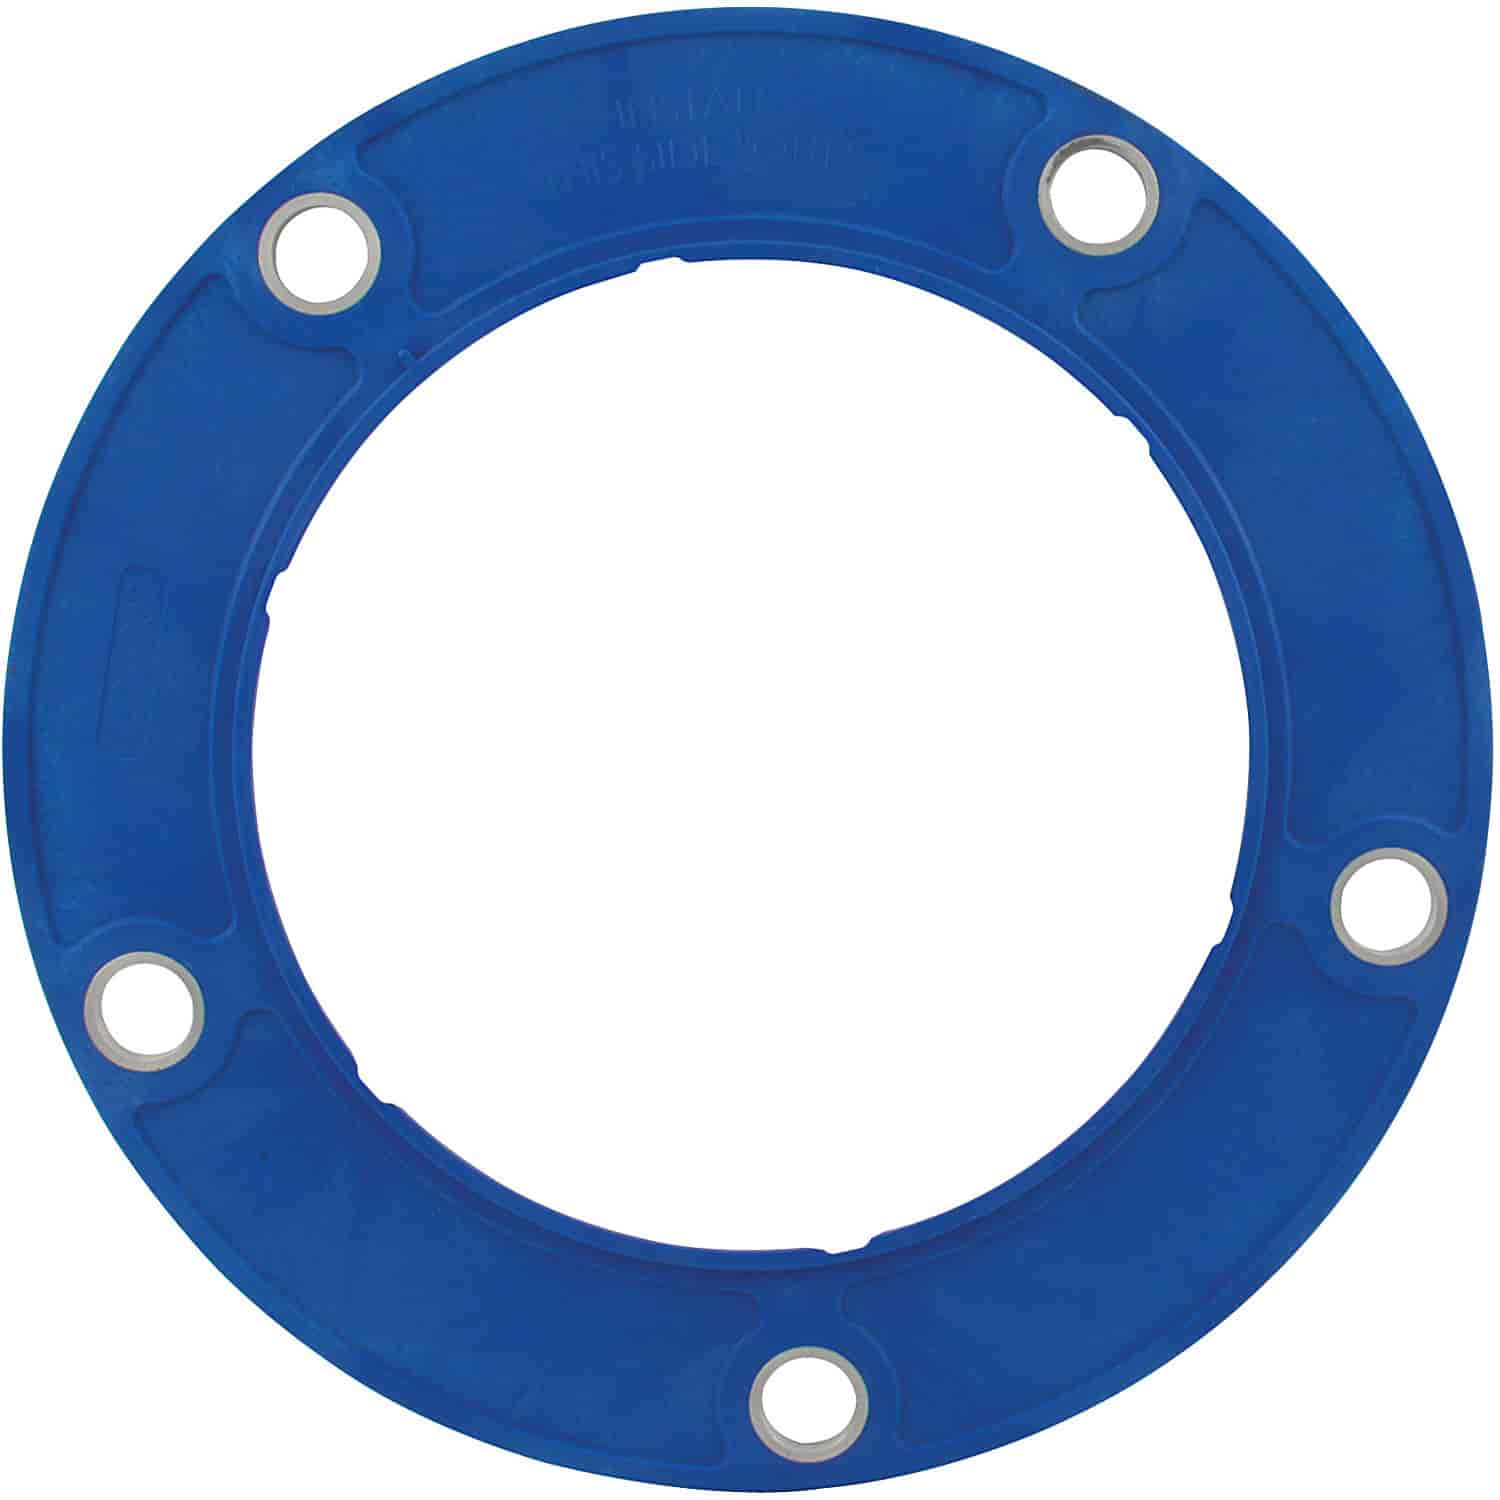 Plastic Wheel Spacer 1/4" Thick